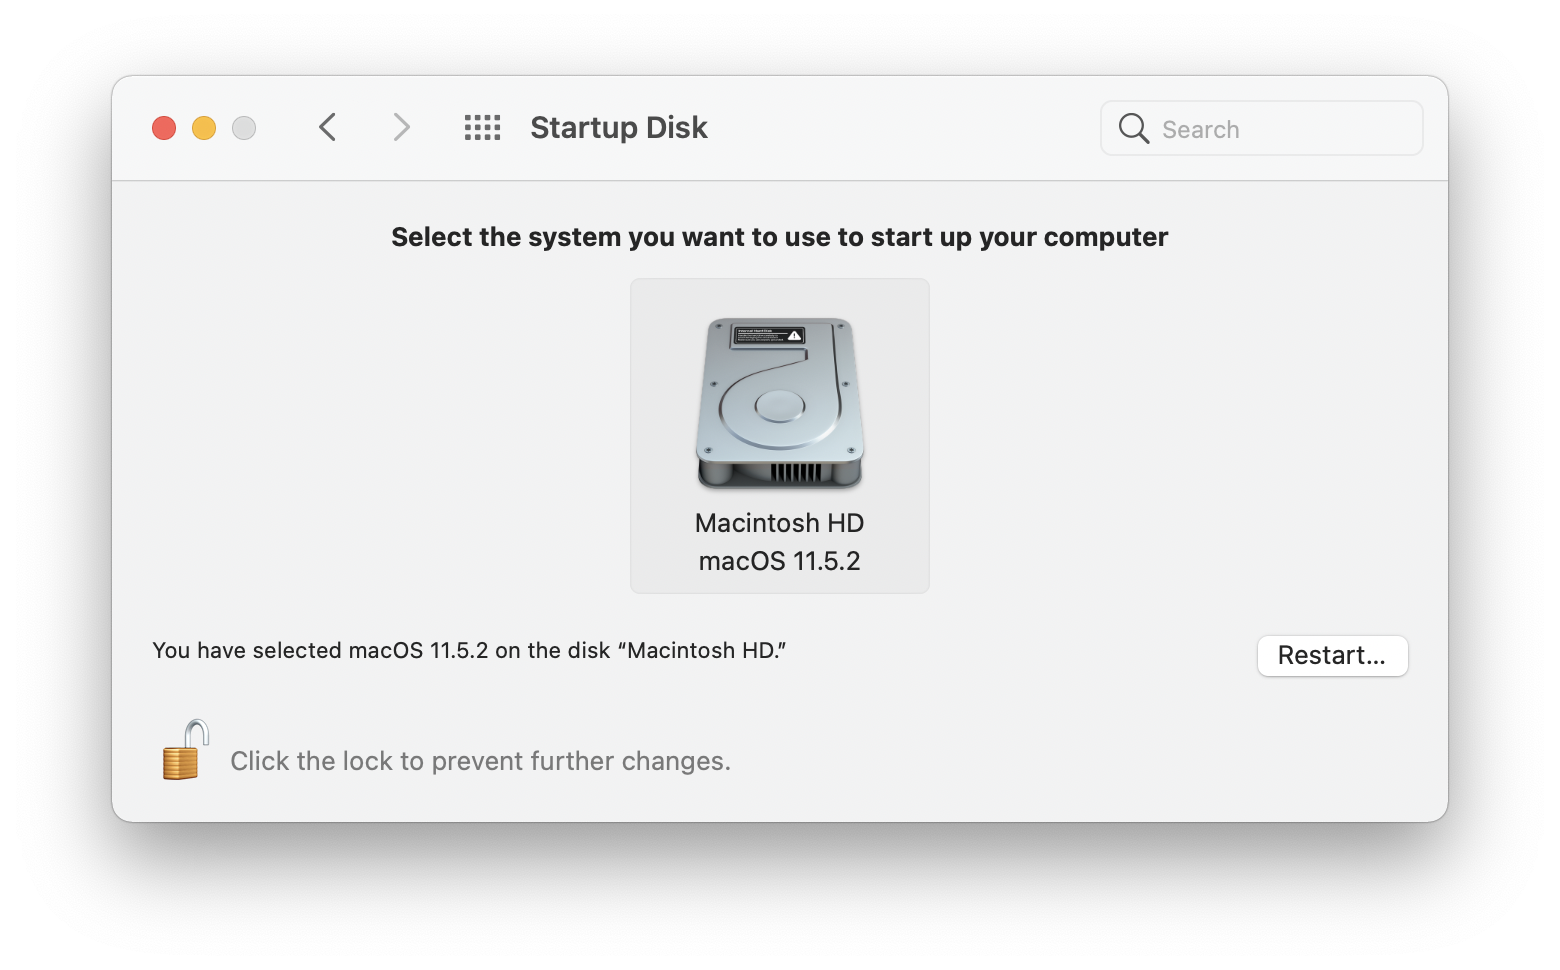 Select the system you want to use to start up your computer